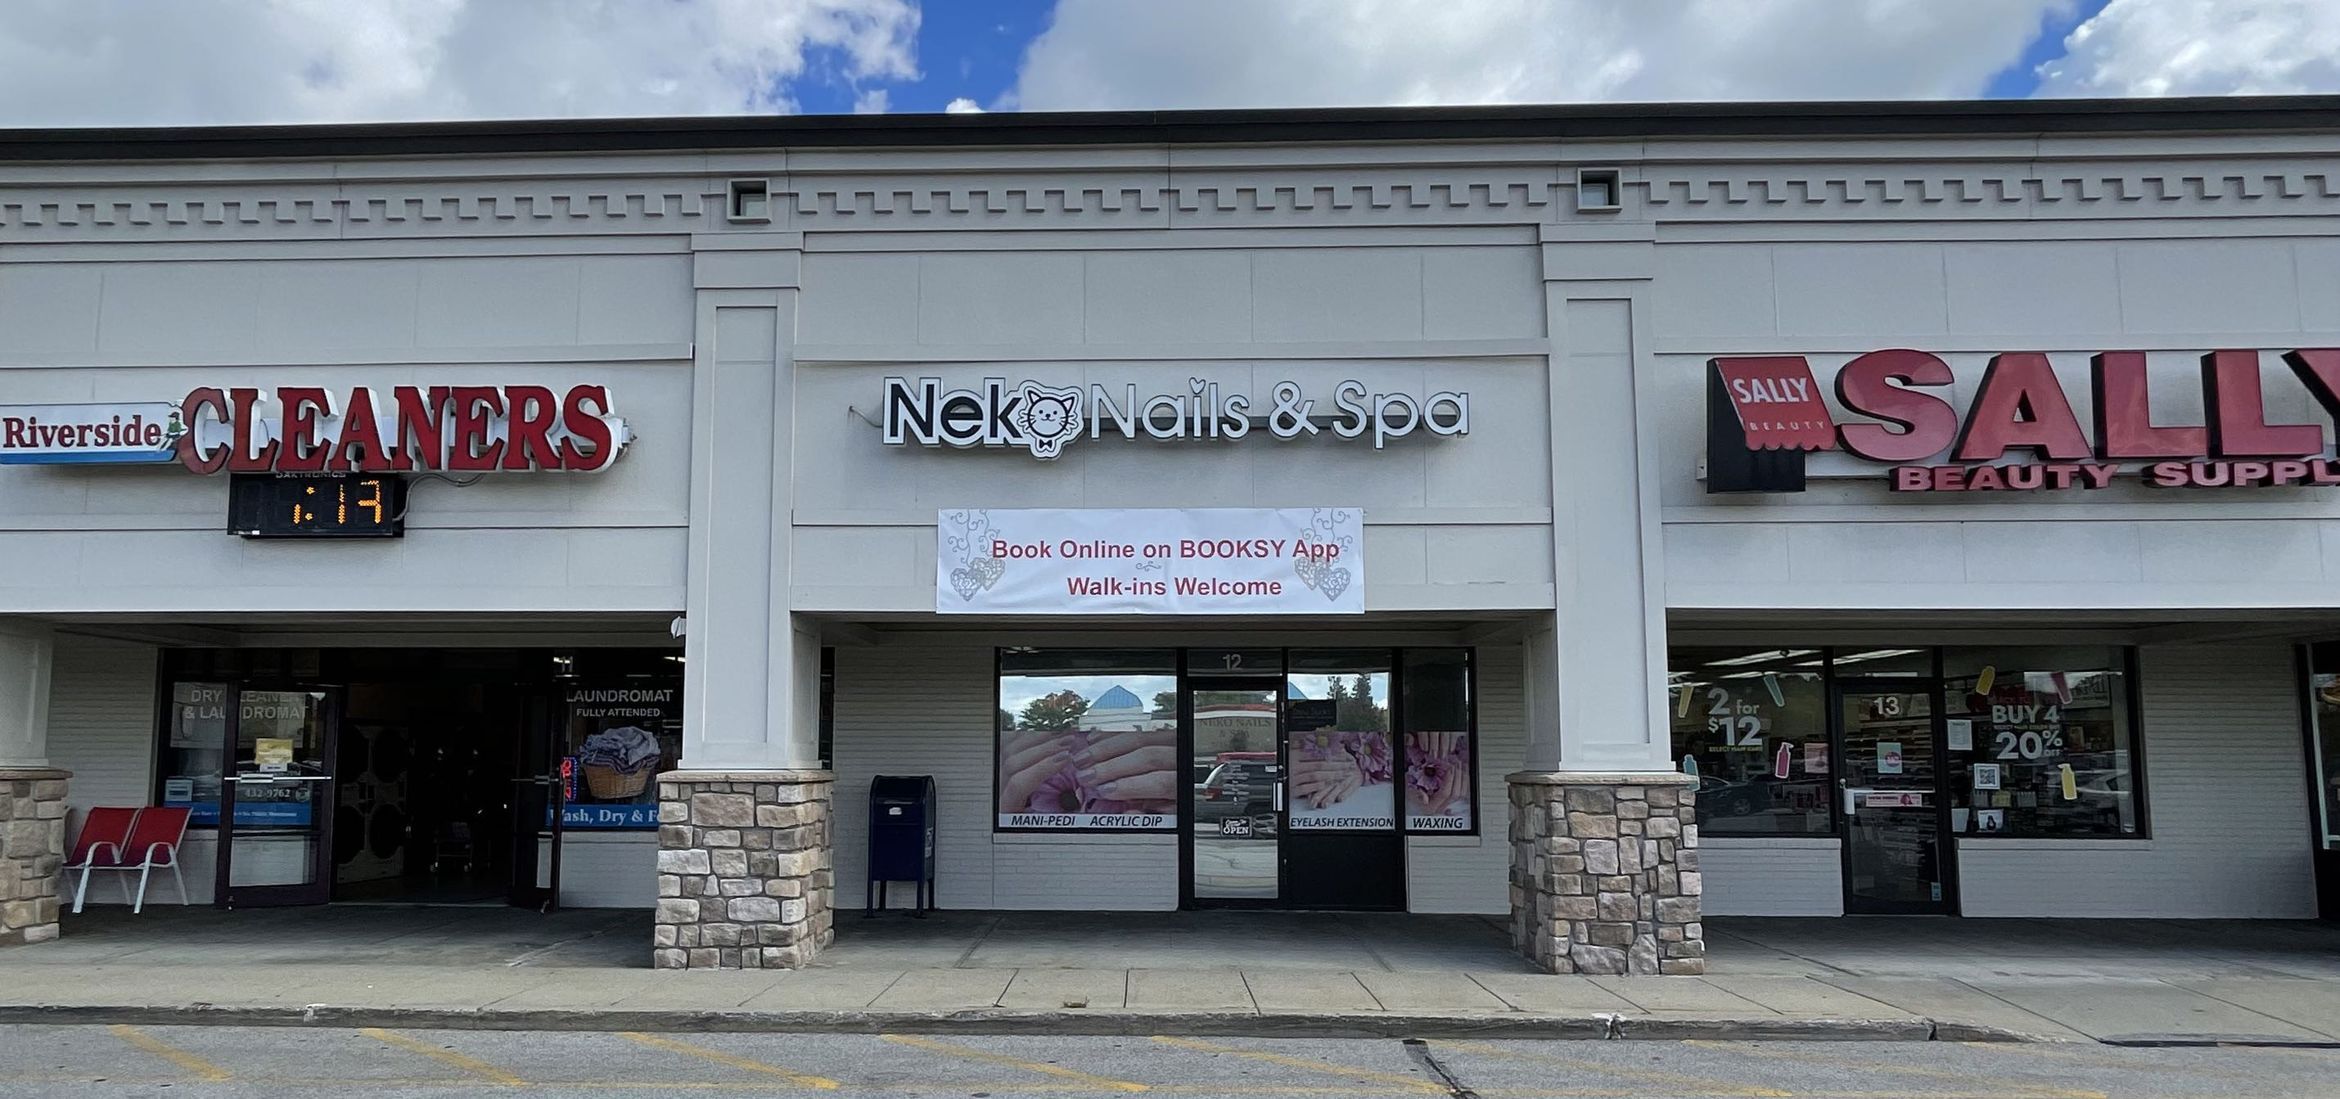 Gallery collection Neko Nails & Spa - Nail salon in Derry, NH 03038